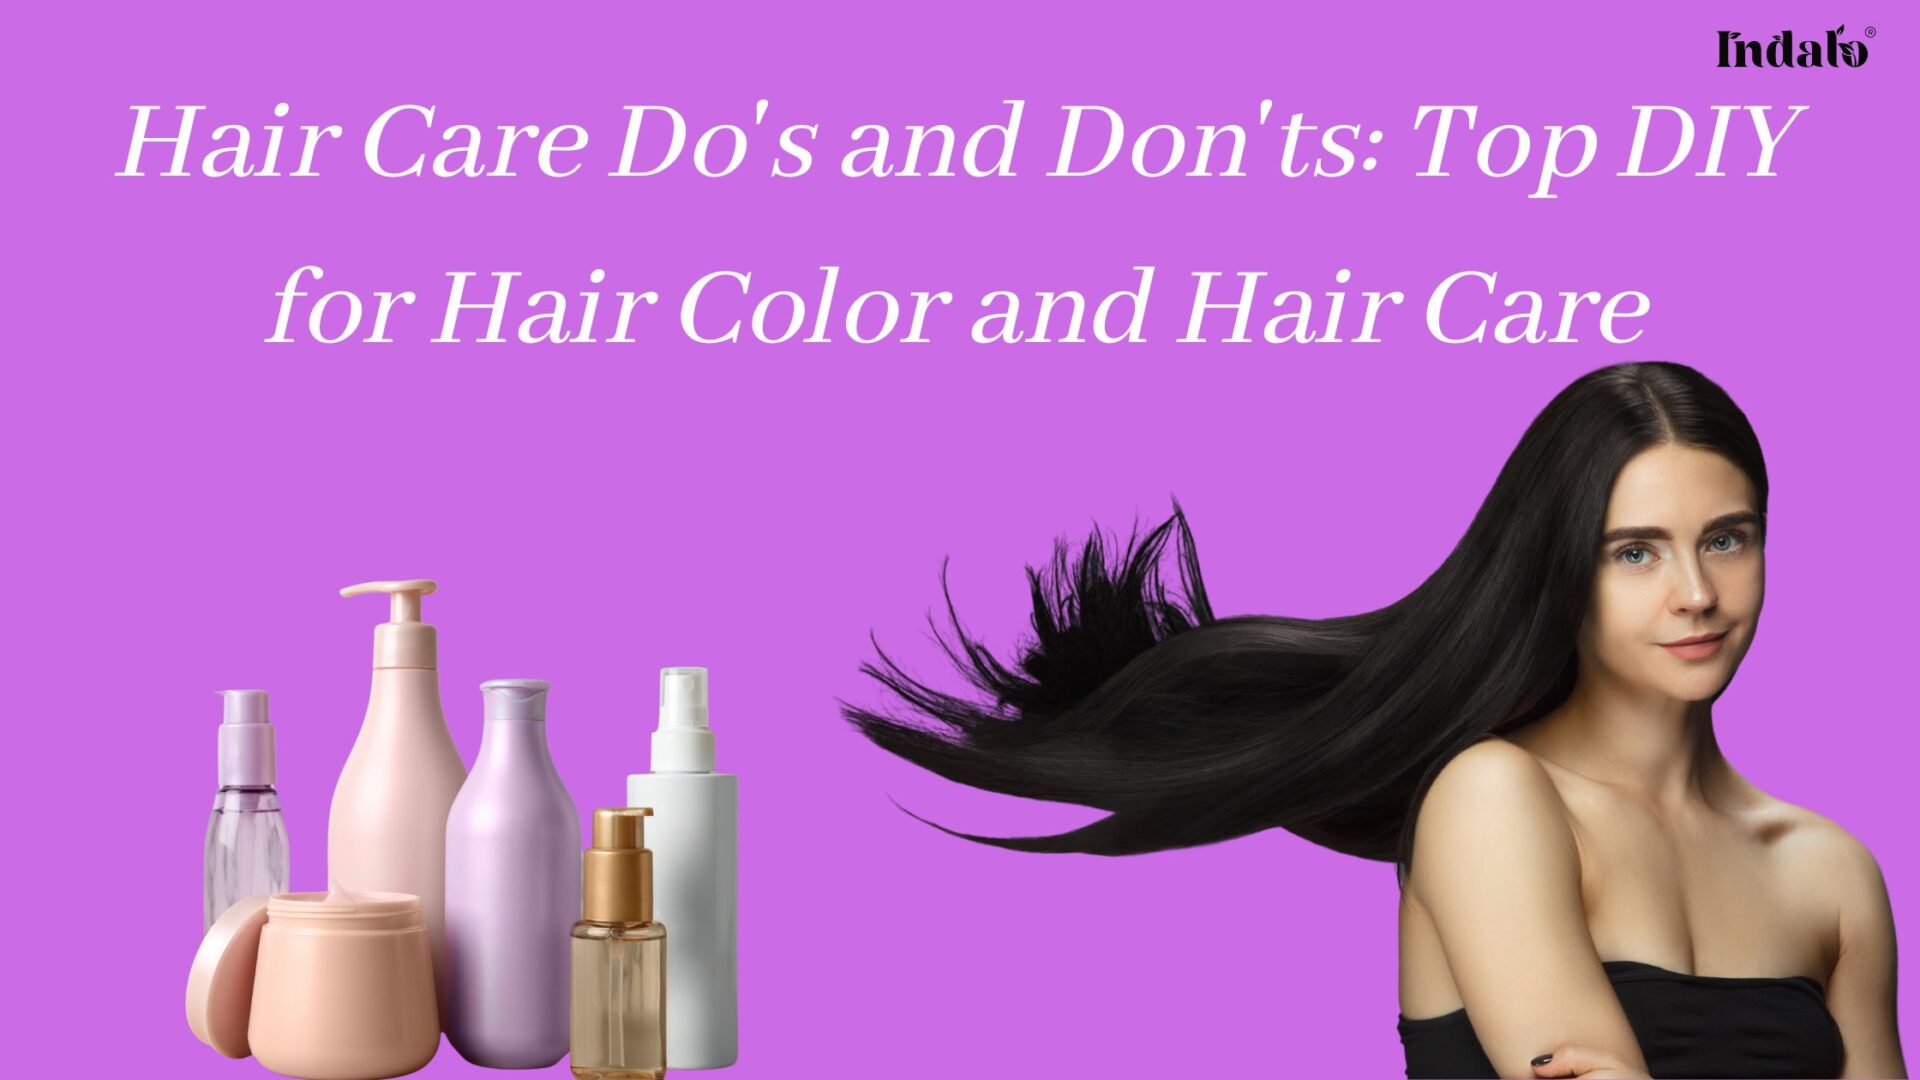 Hair Care Do's and Don'ts